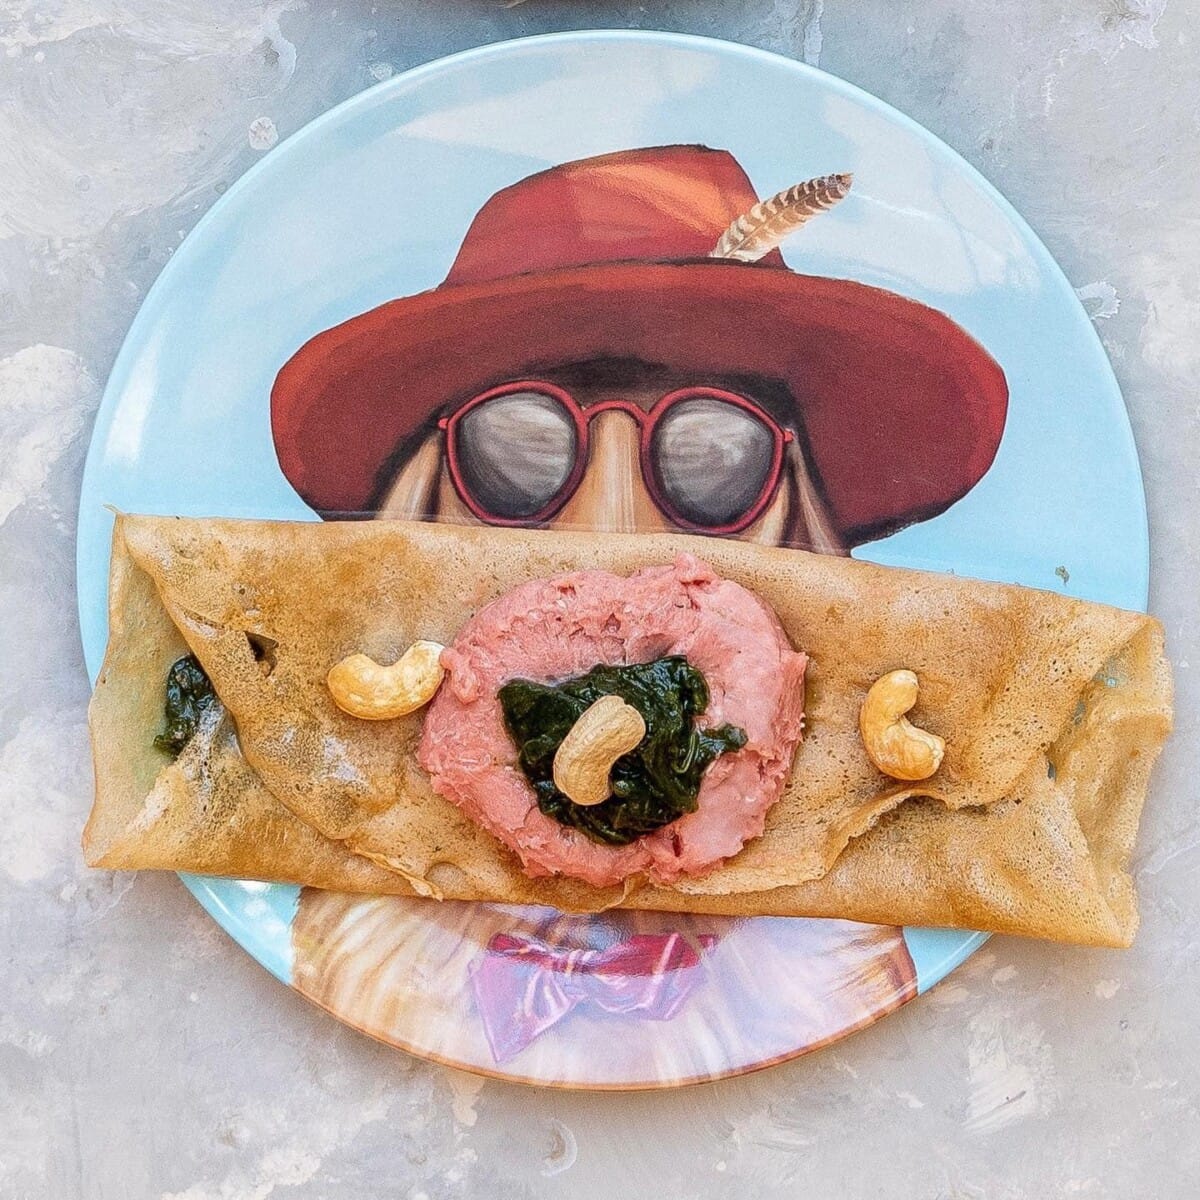 At a dog-friendly cafe in Melbourne, a charming plate featuring a whimsical illustration of a dog in a red hat serves as the backdrop for a delicious crepe, making for a memorable and tasty meal.